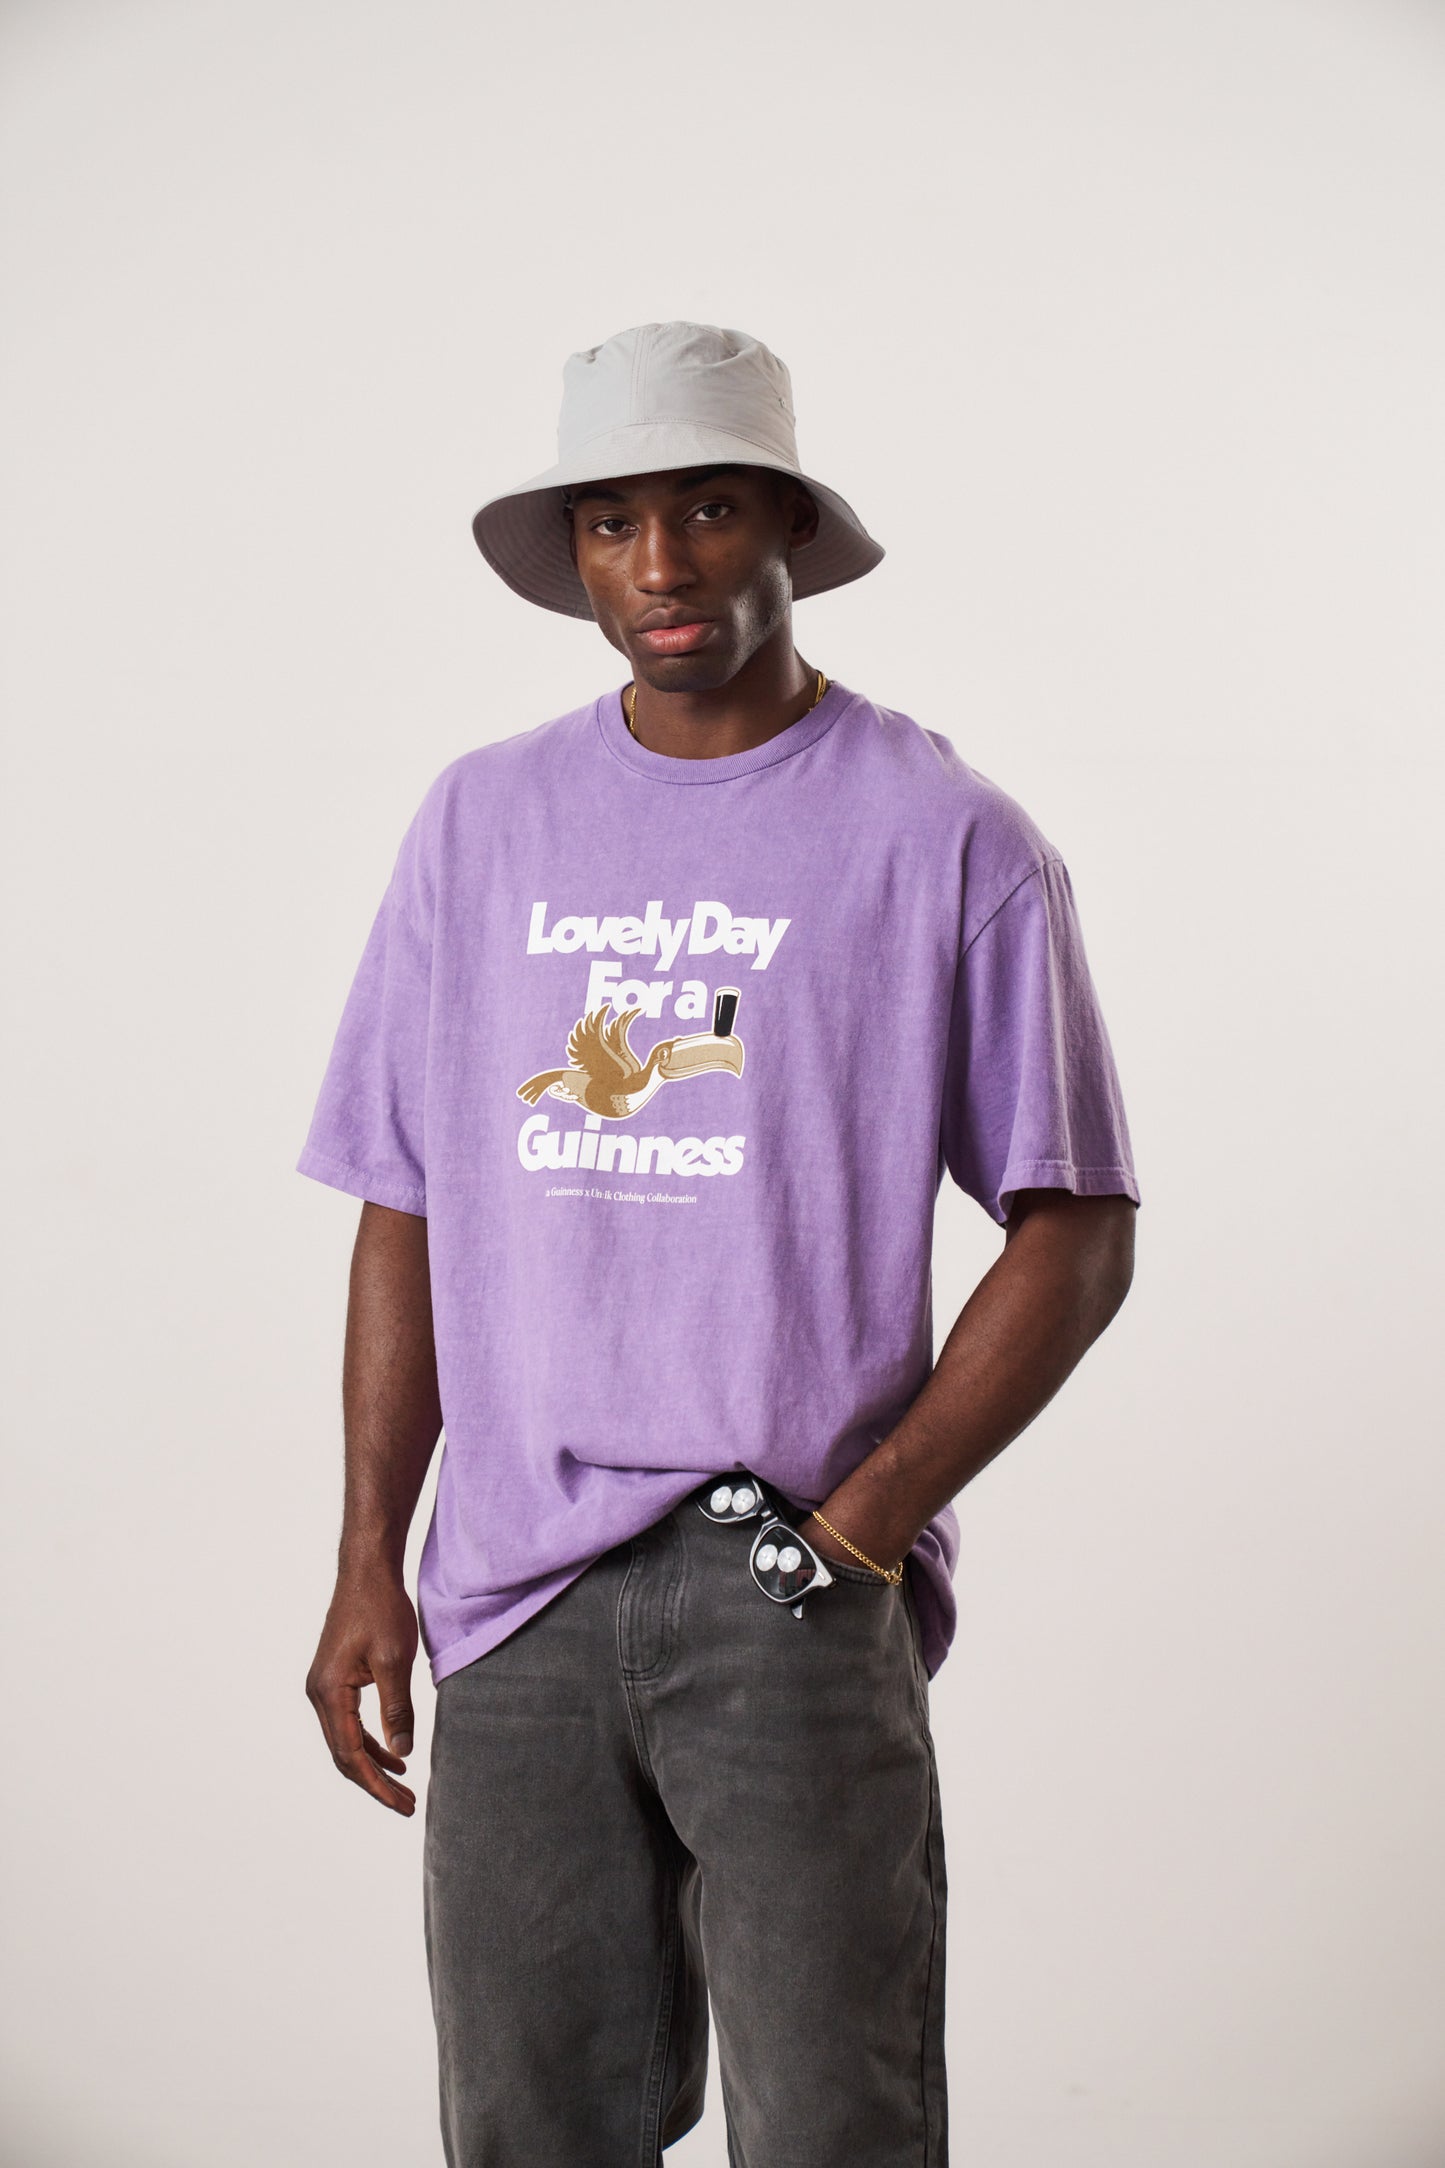 Guinness x UN:IK 'Lovely Day' Vintage Washed Tee - Purple